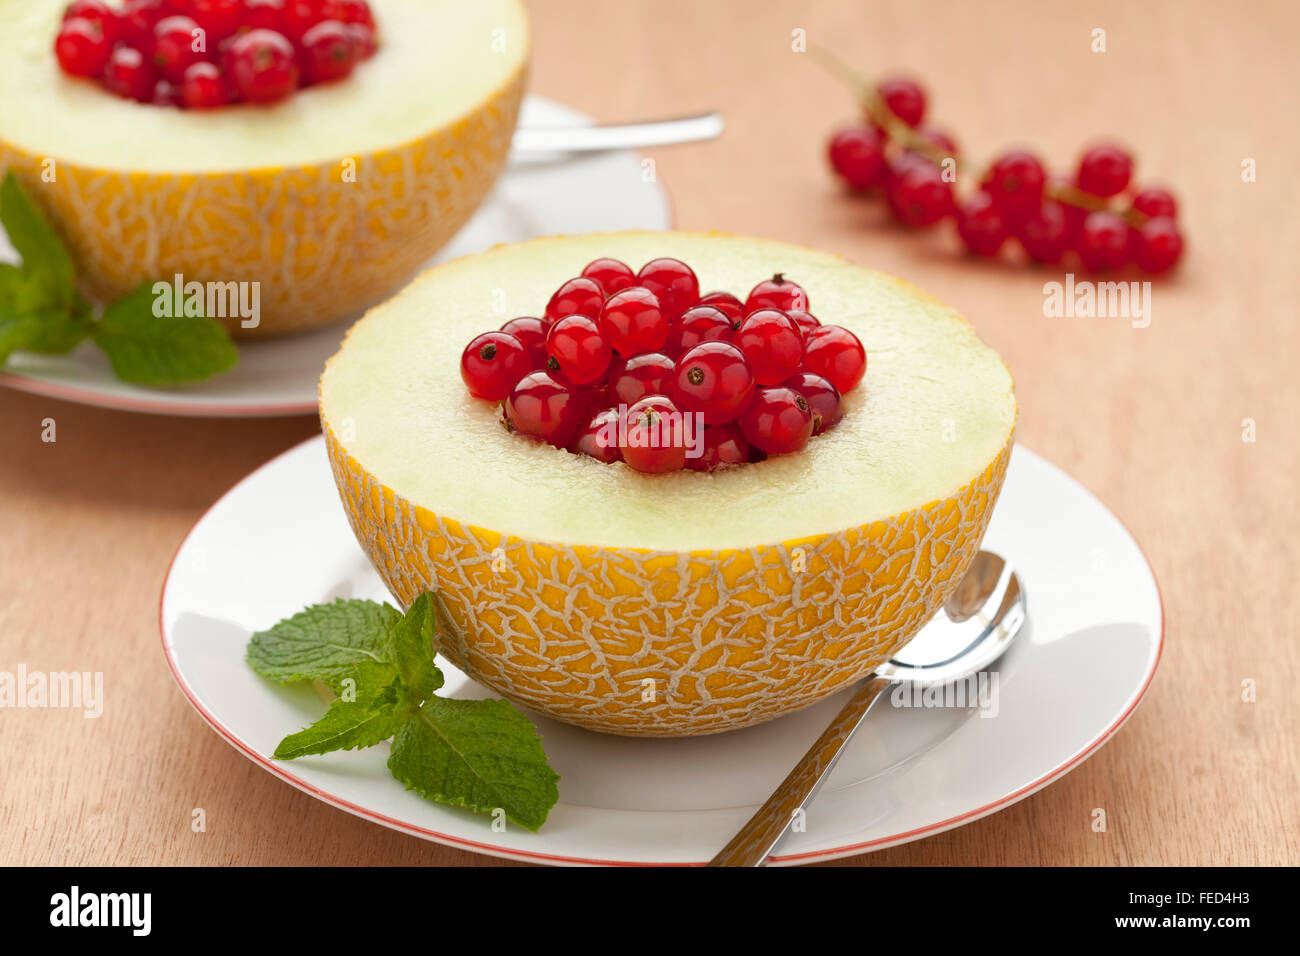 Melon filled with red currants for dessert Stock Photo